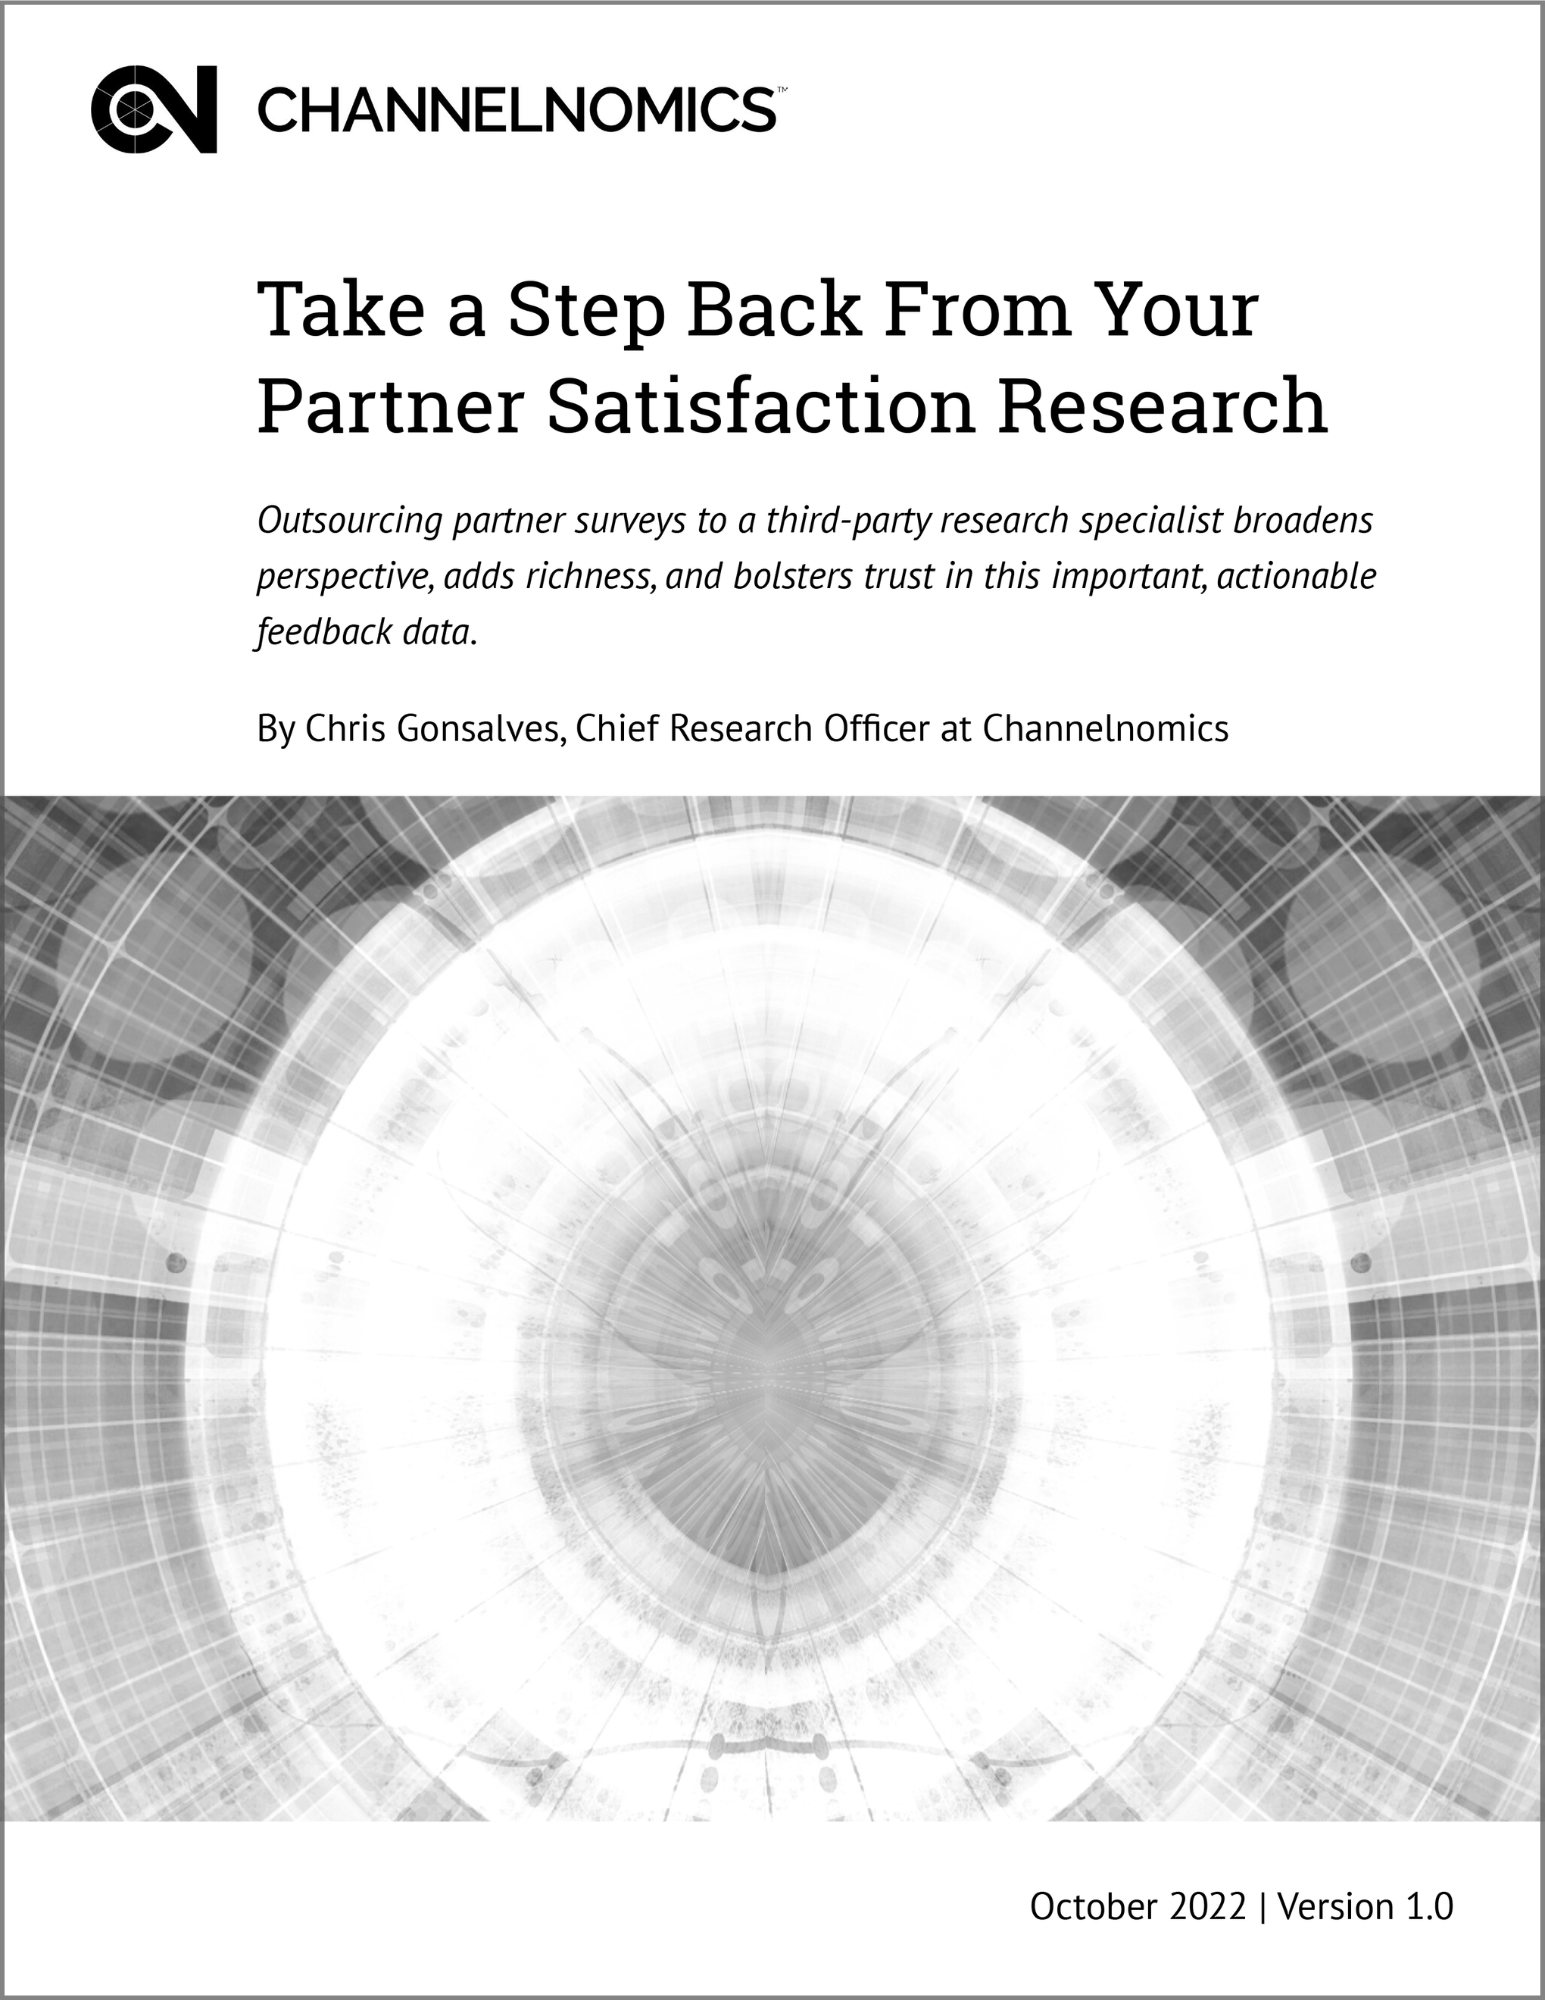 Take a Step Back From Your Channel Satisfaction Research